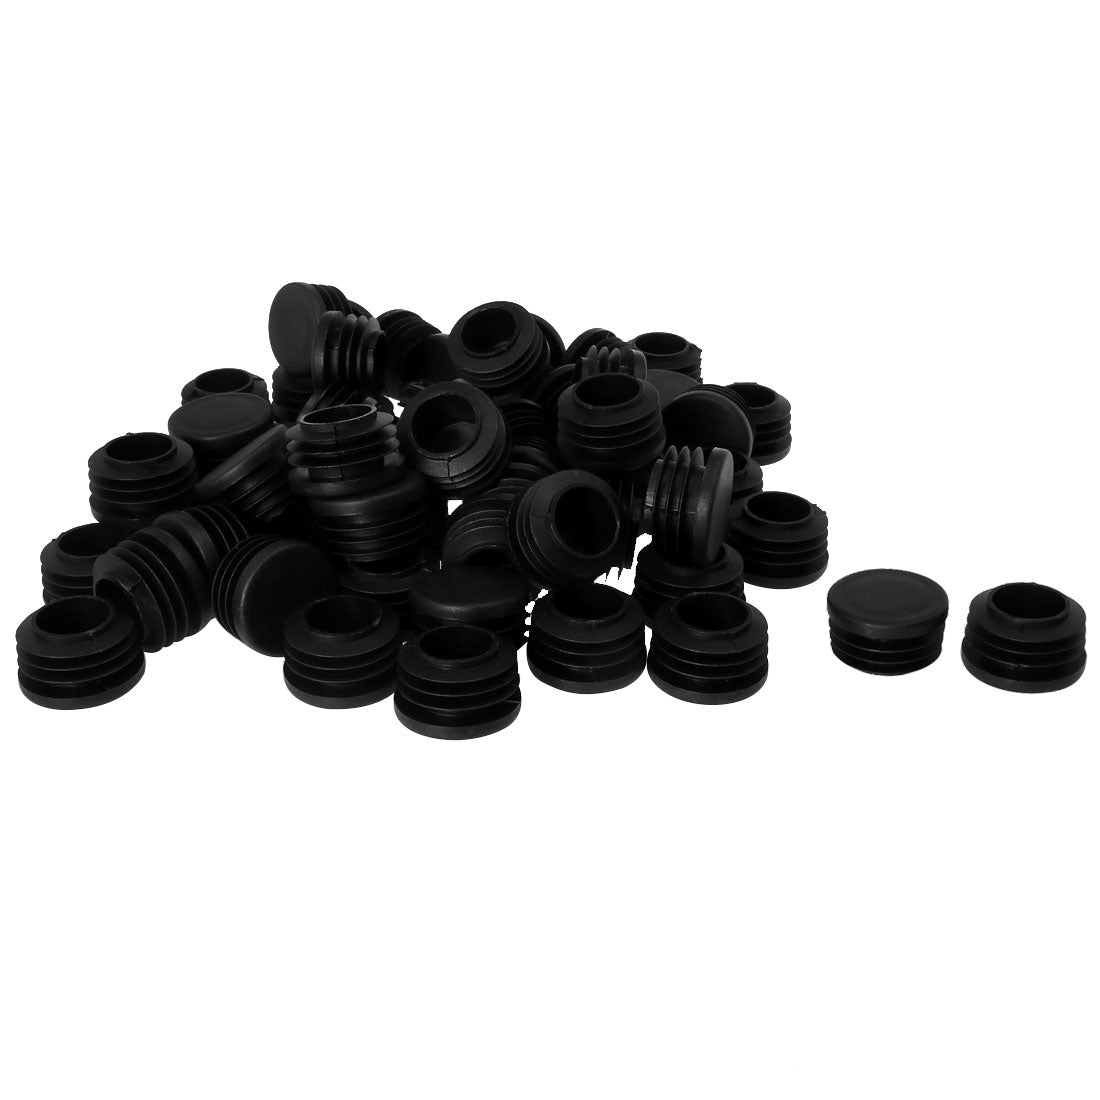 Uxcell Uxcell 1 1/8 " 1.18" OD Plastic Round Tube Insert Glide End Cap Pad 60pcs 1.06"-1.44" Inner Dia for Furniture Deck Protector Avoid Scratch